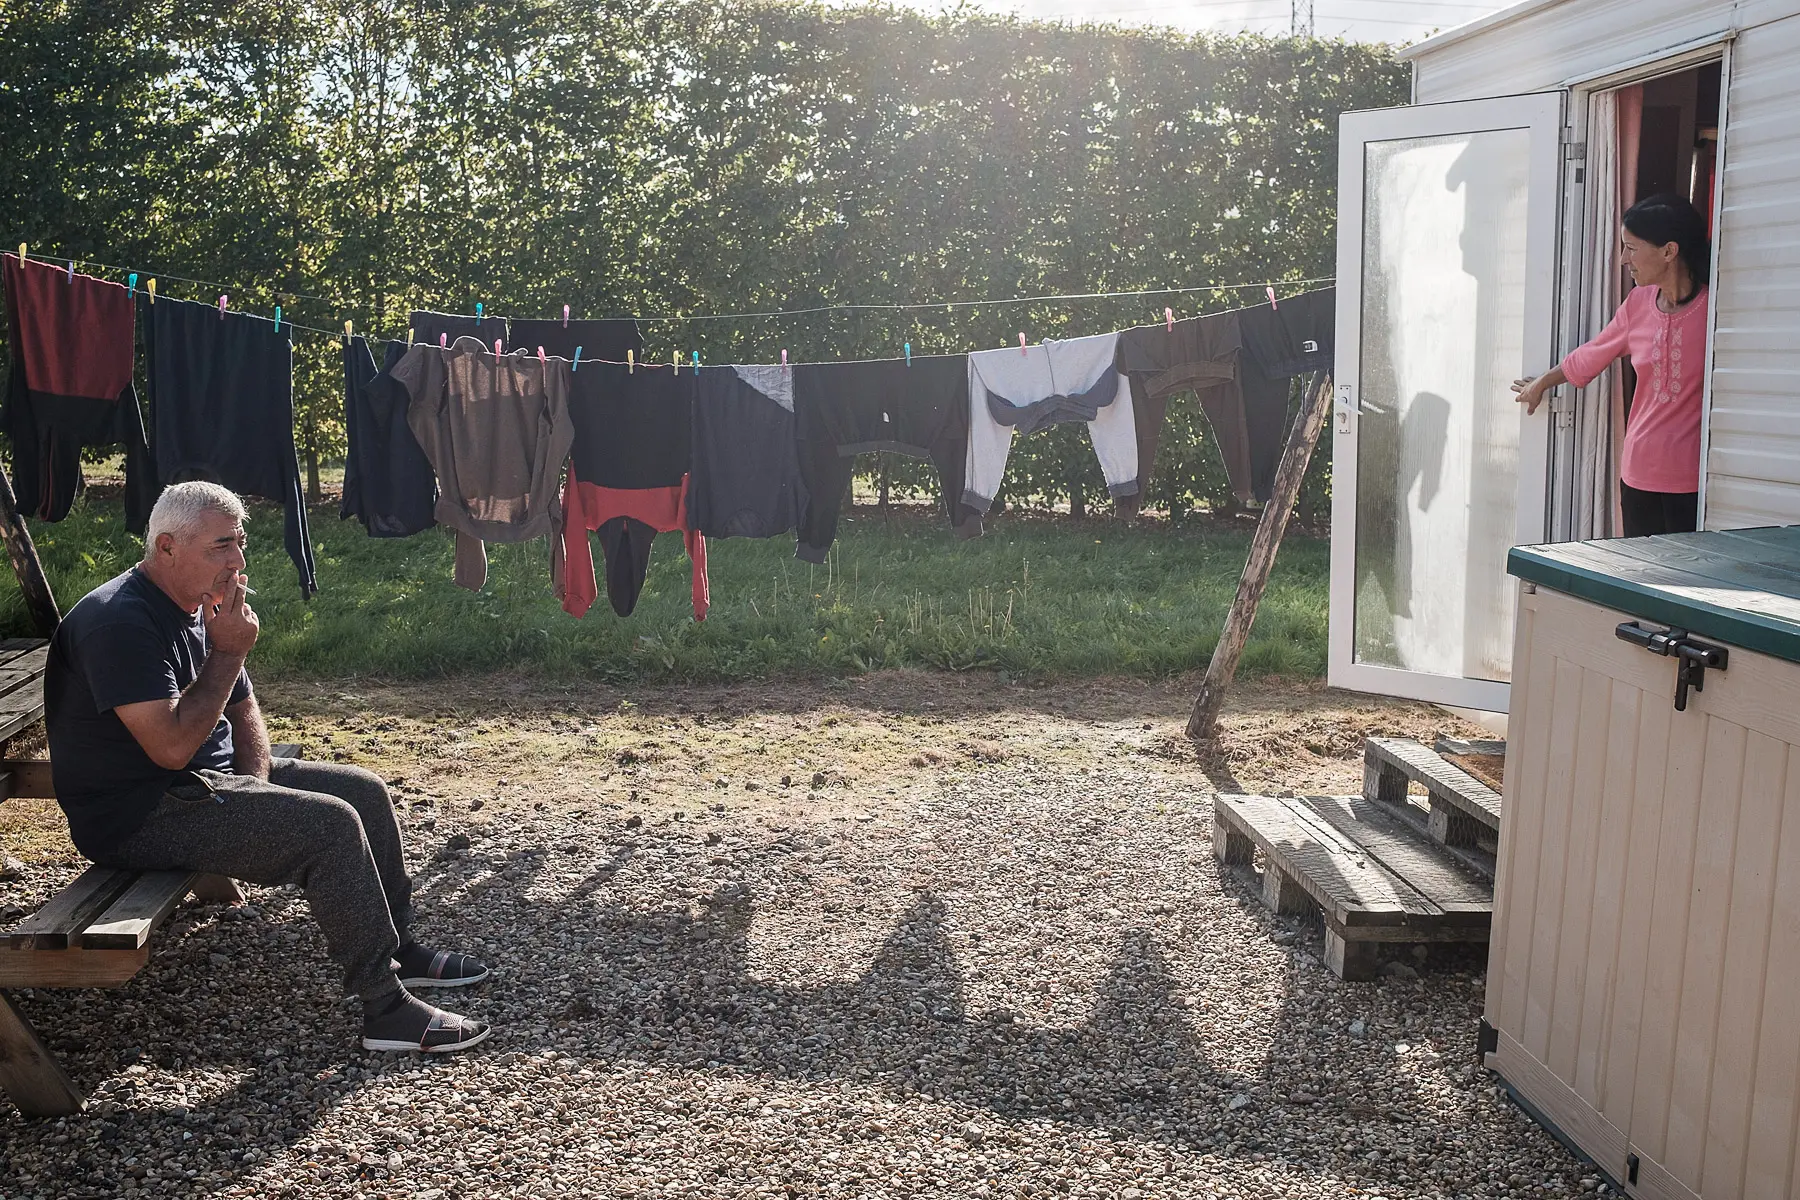 A man enjoys day off. He smokes a cigarette while clothes hang to dry outside the caravan